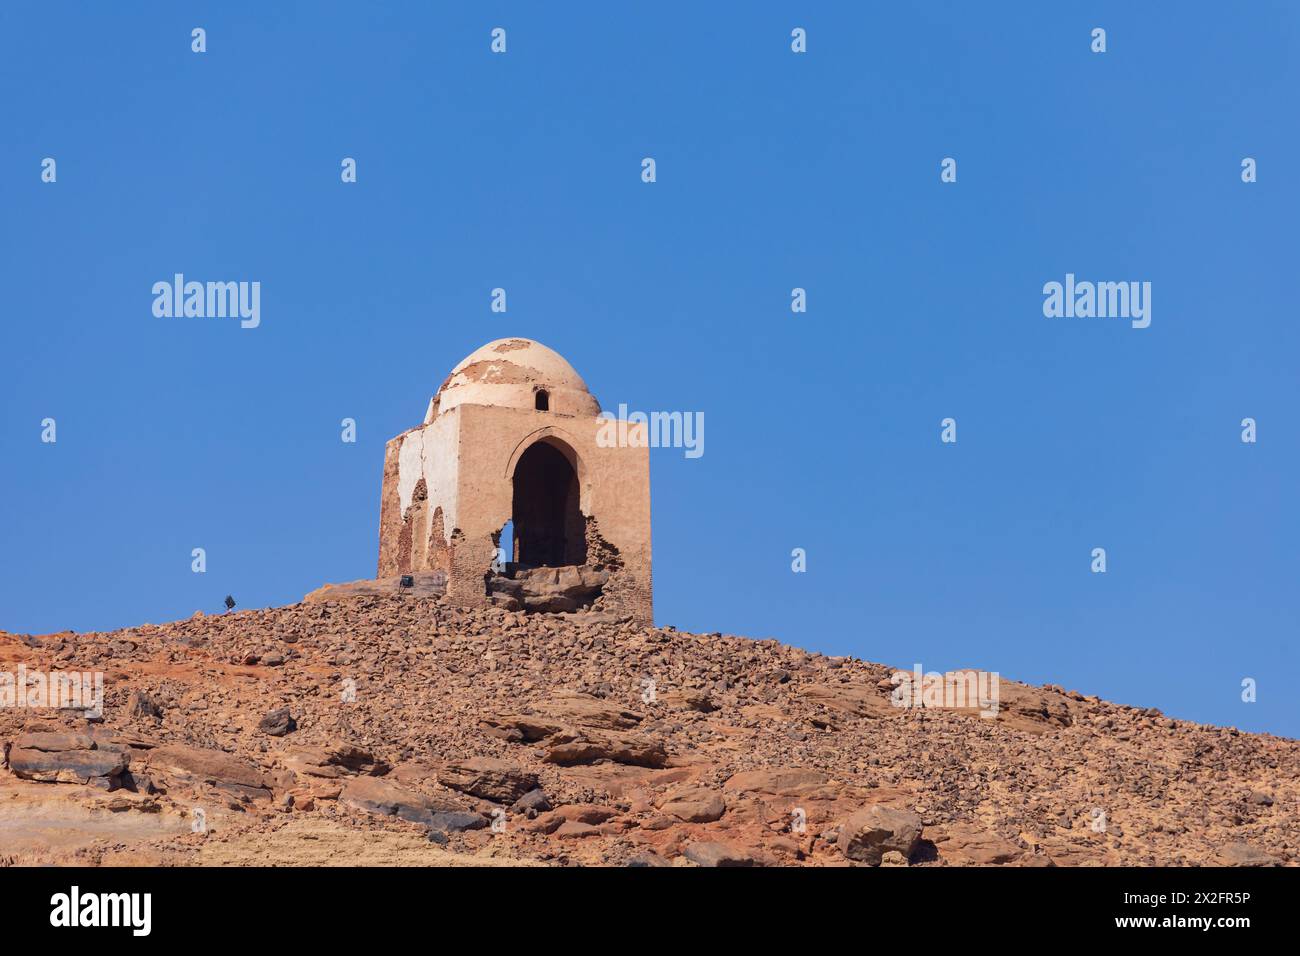 Dome of Abu al-Hawa, Qubbet el-Hawa, dome of the wind, on the west bank of the River Nile, Aswan, 'Egypt Stock Photo